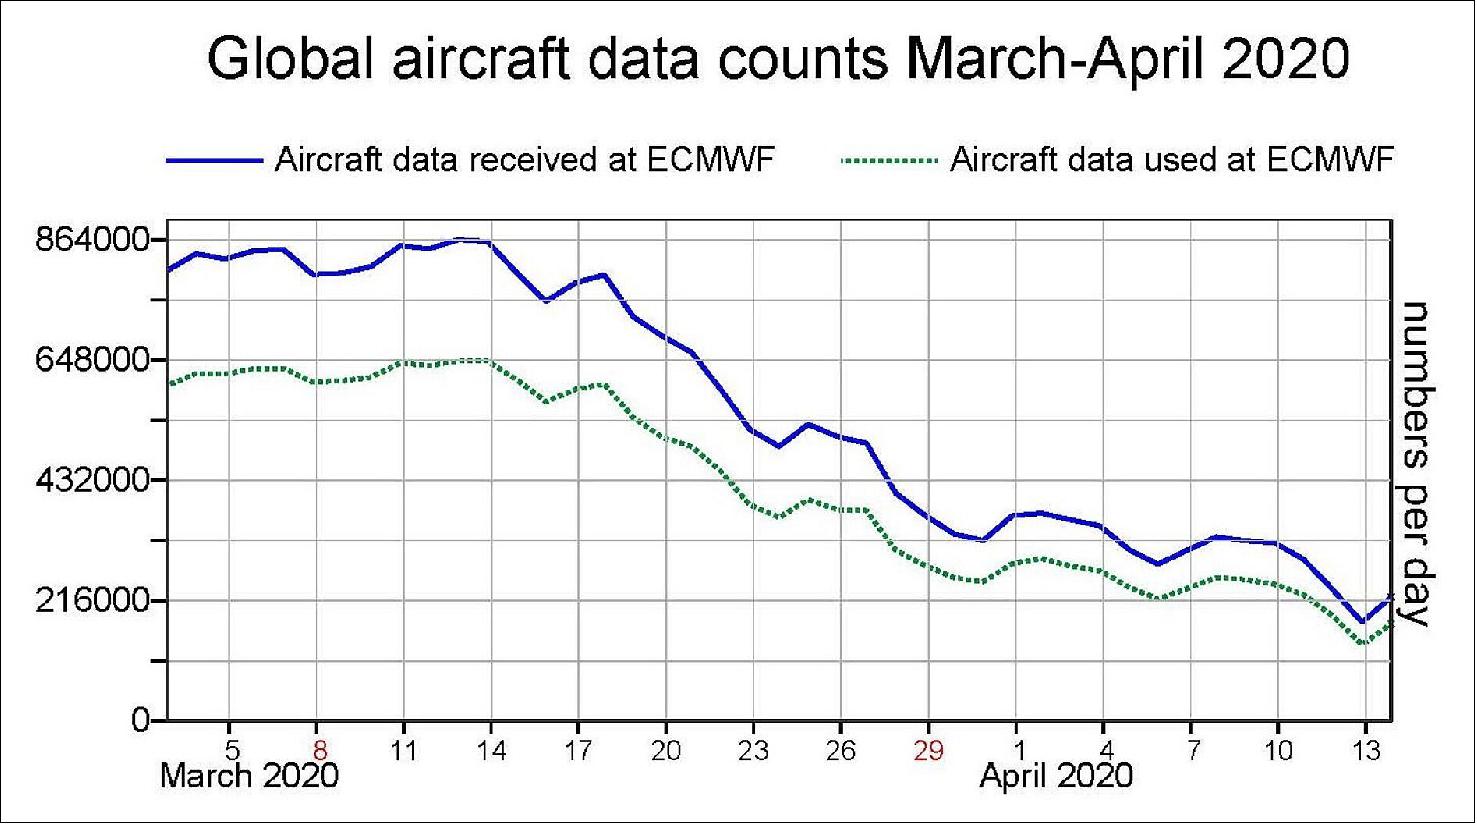 Figure 27: The data counts of aircraft weather data received at ECMWF from 3 March to 14 April 2020. The dramatic reduction relates to reduced air traffic due to COVID-19 (image credit: ECMWF)